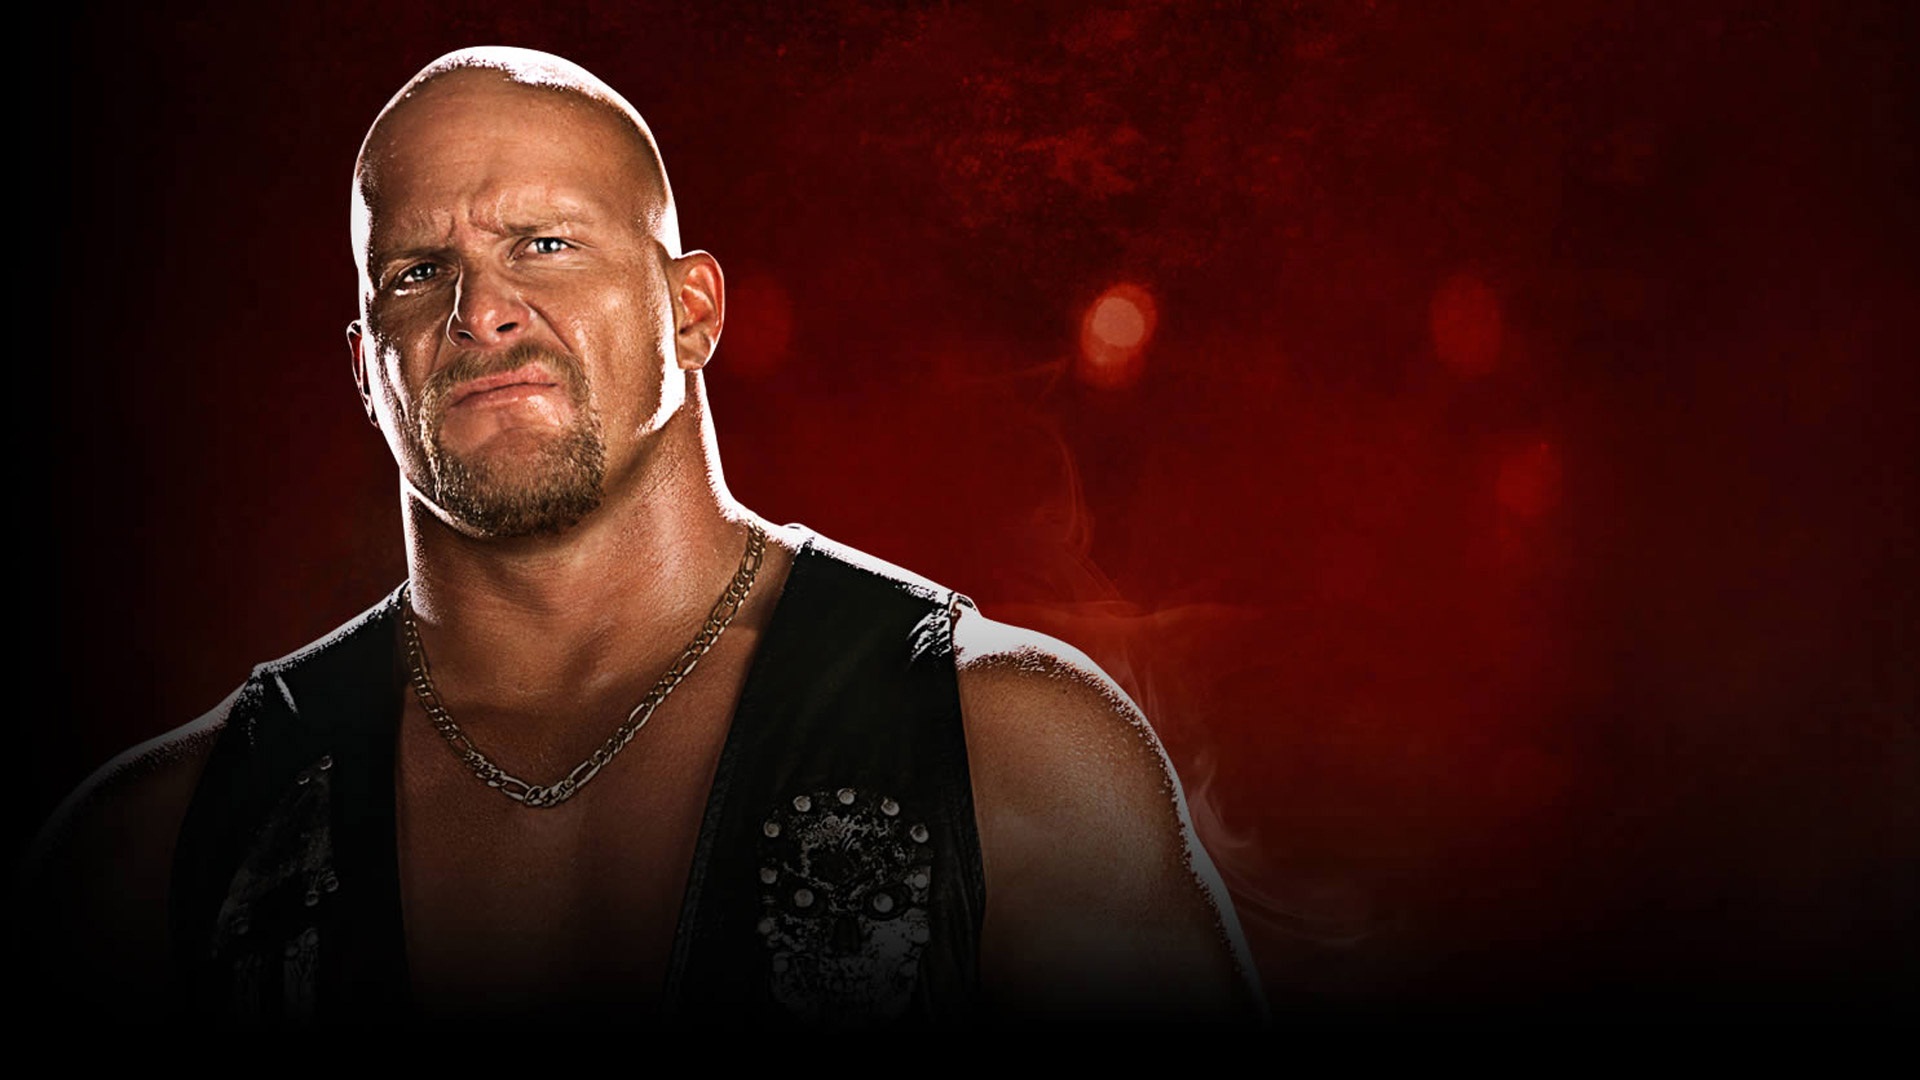 Stone Cold High Definition Wallpaper.